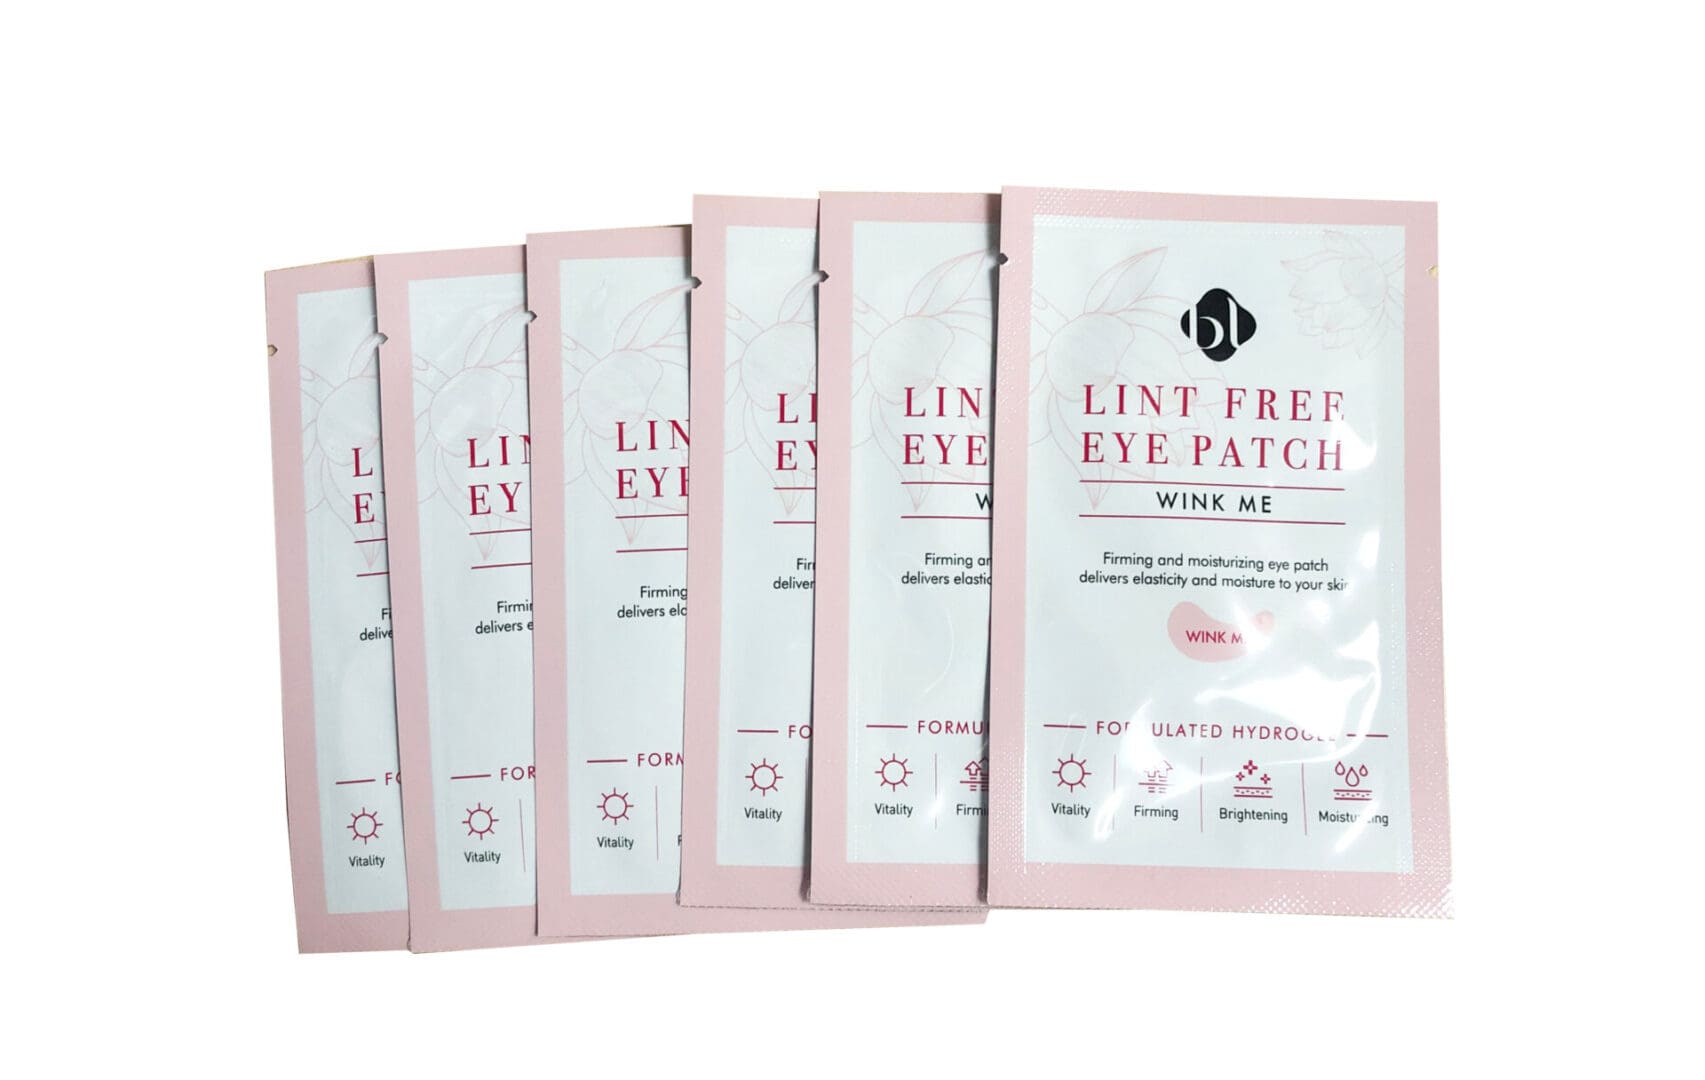 A set of six packages of lintfree eye patches.